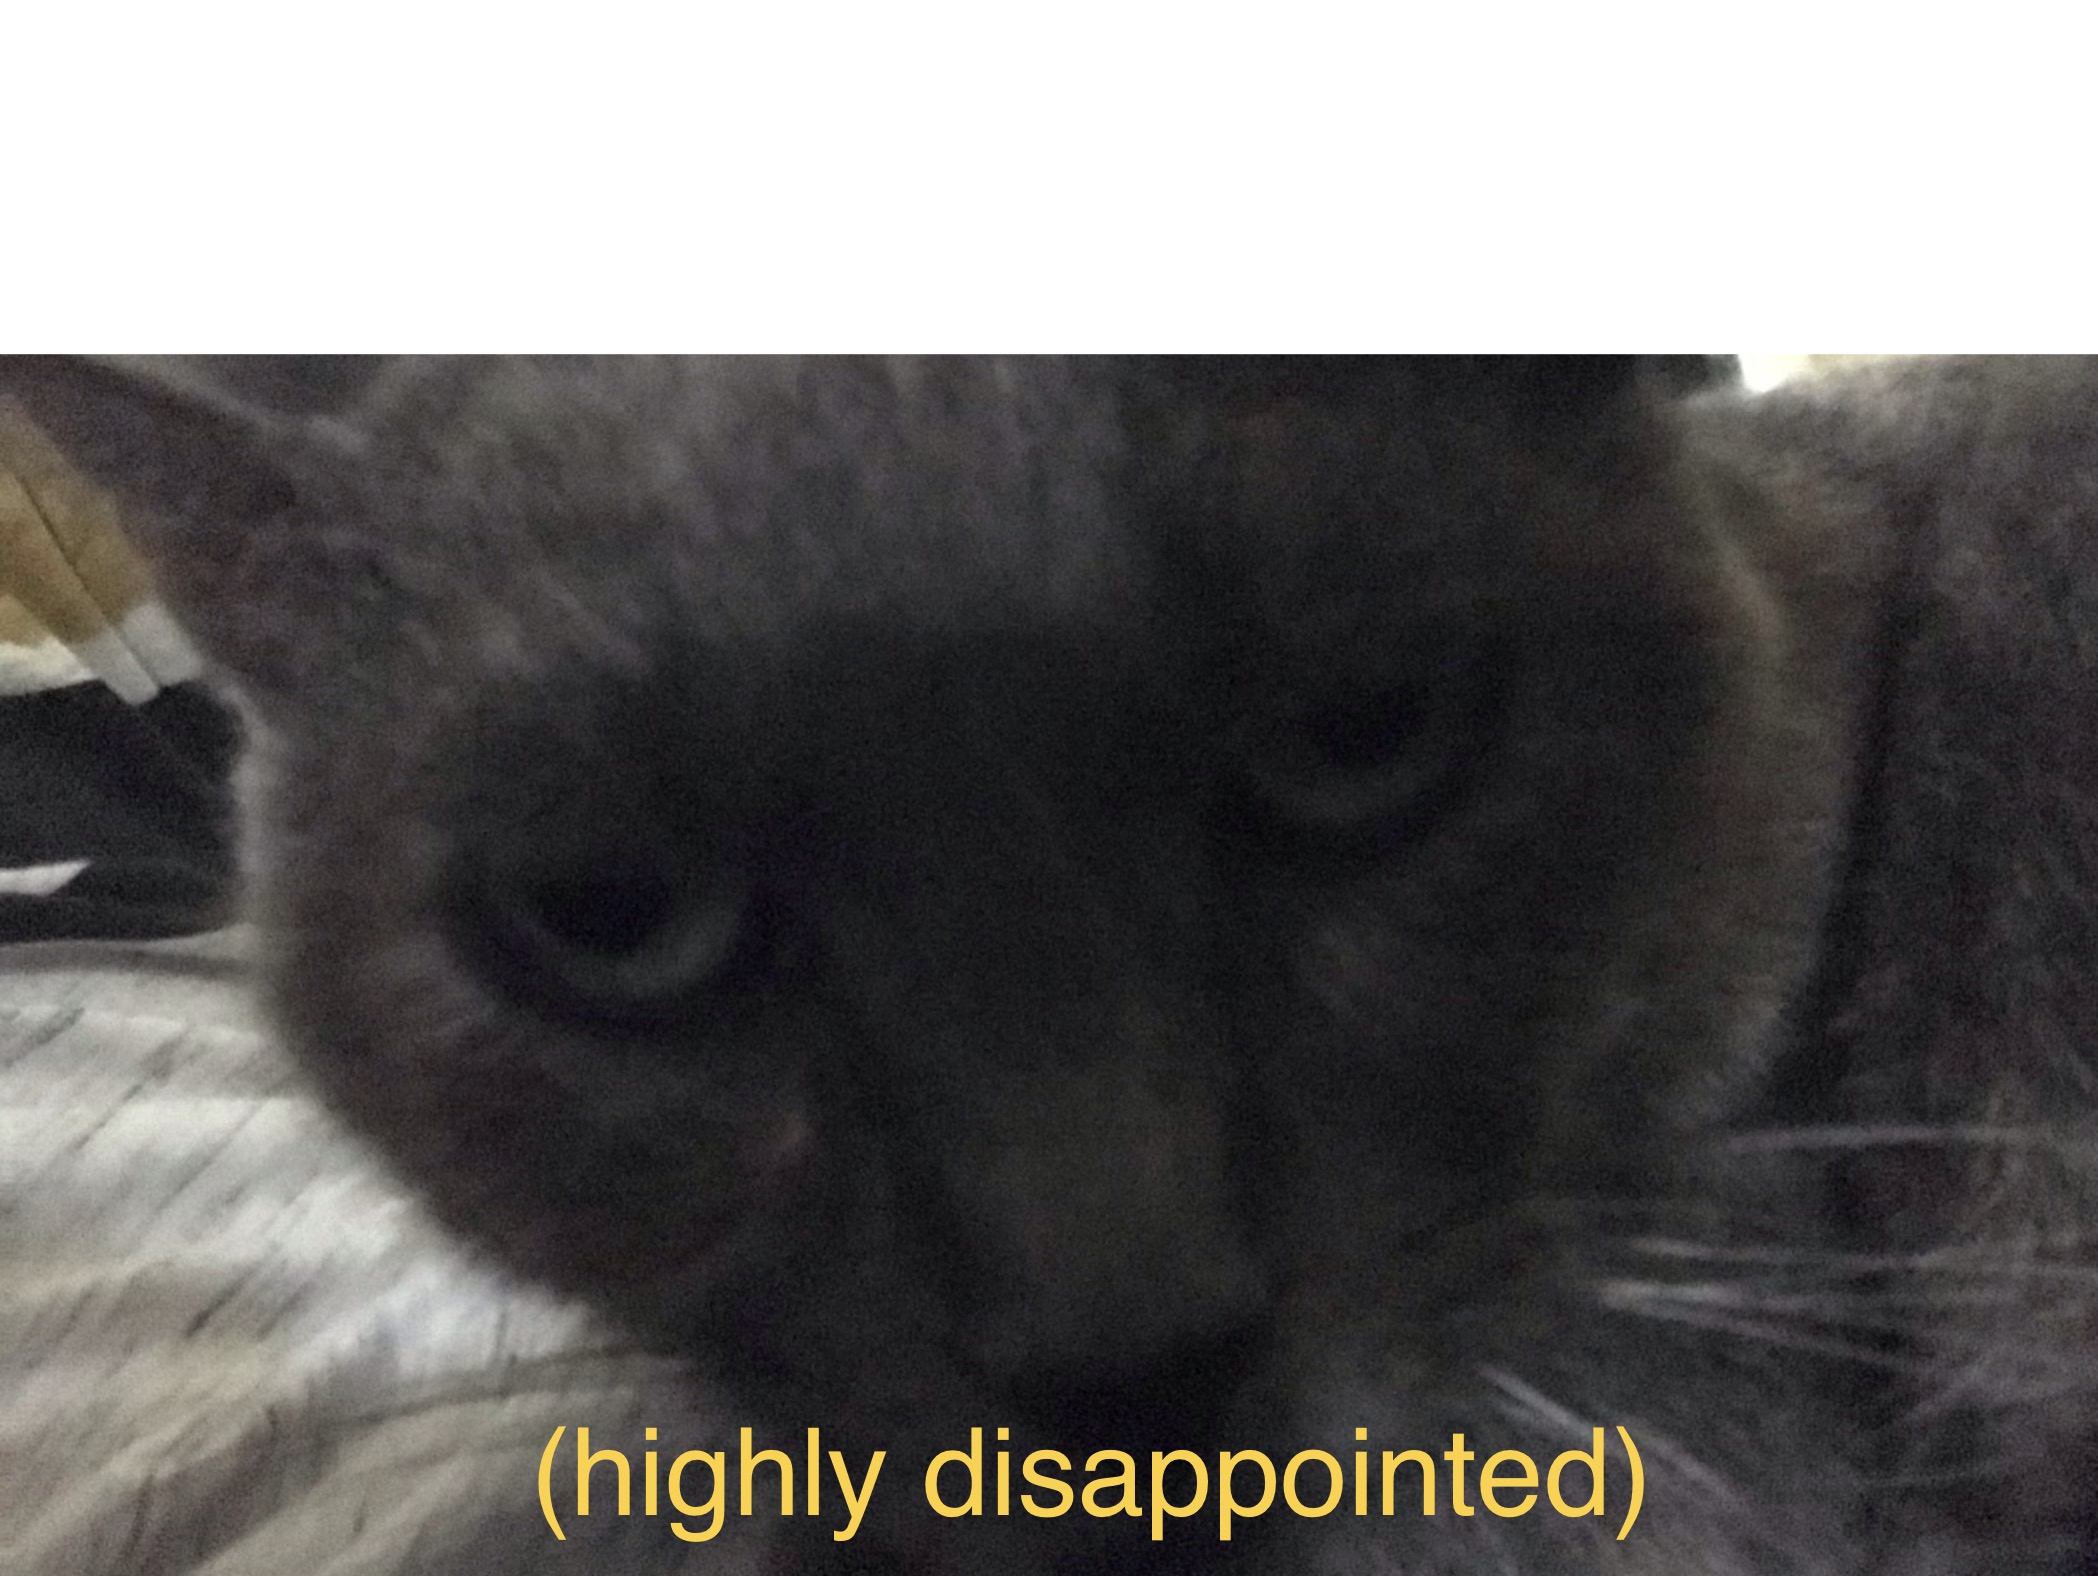 High Quality Cat of high disappointment Blank Meme Template